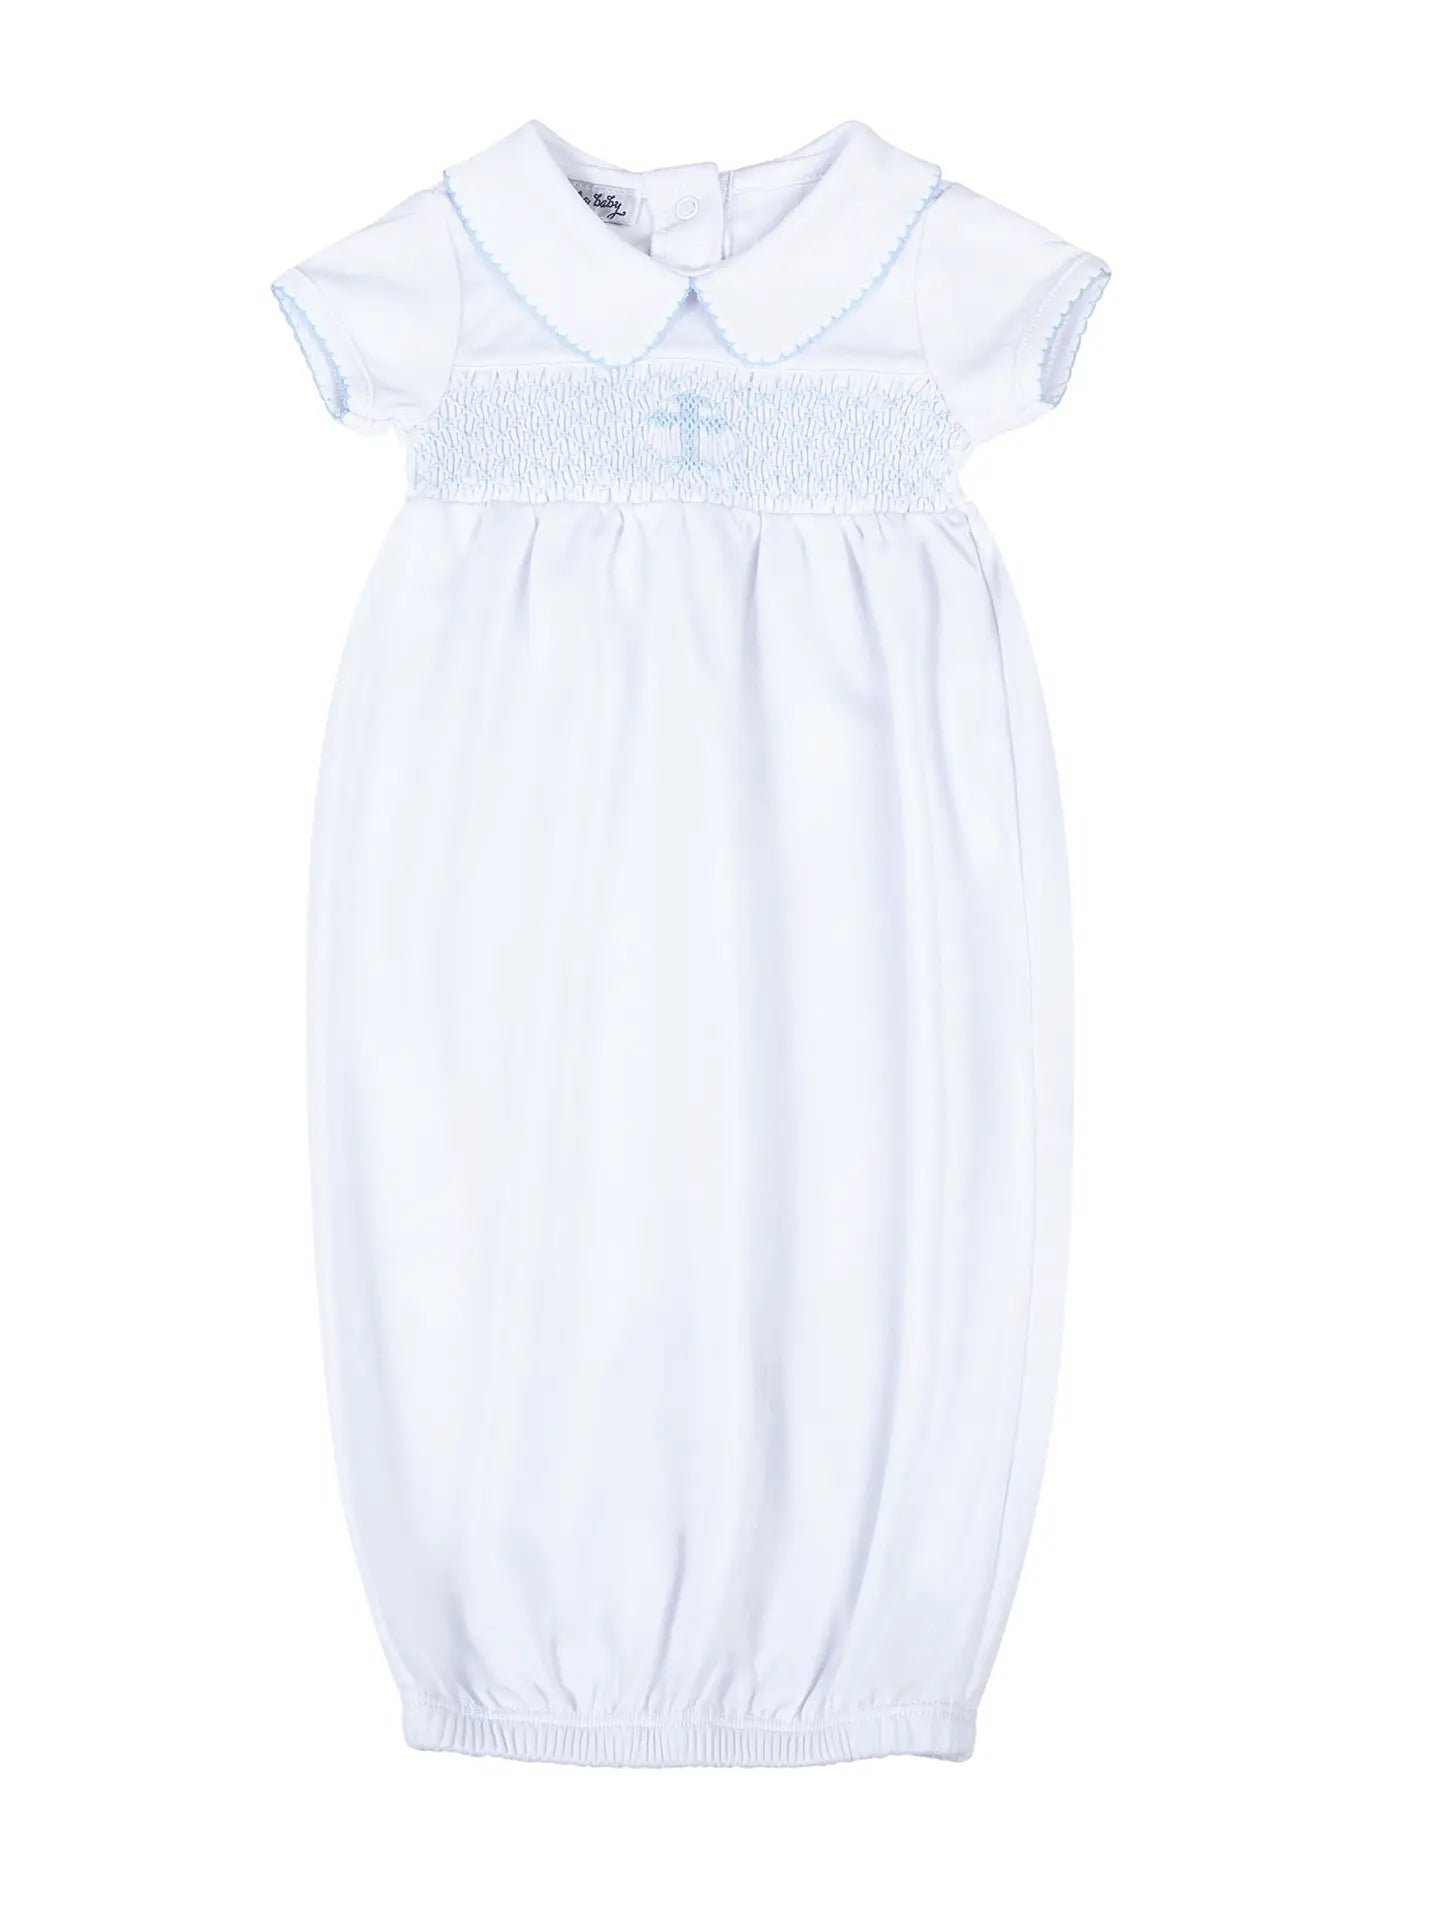 Magnolia Baby: Smocked Collared Pleated Gown - Light Blue